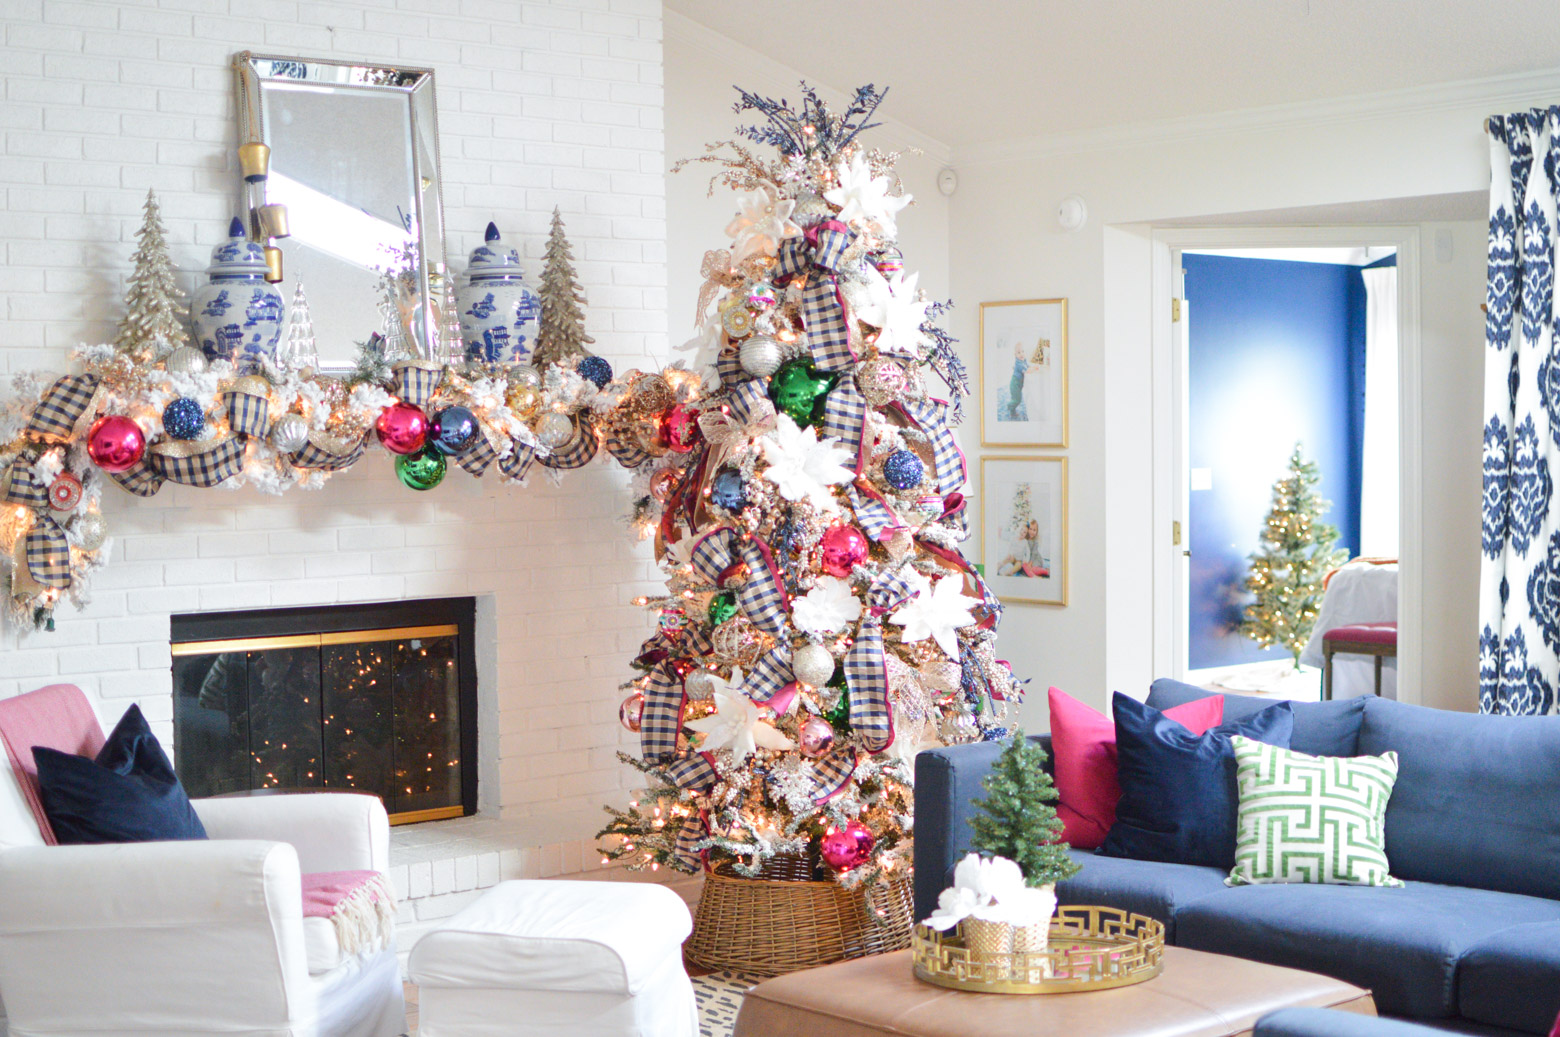 Colorful Chinoiserie Christmas decorating ideas